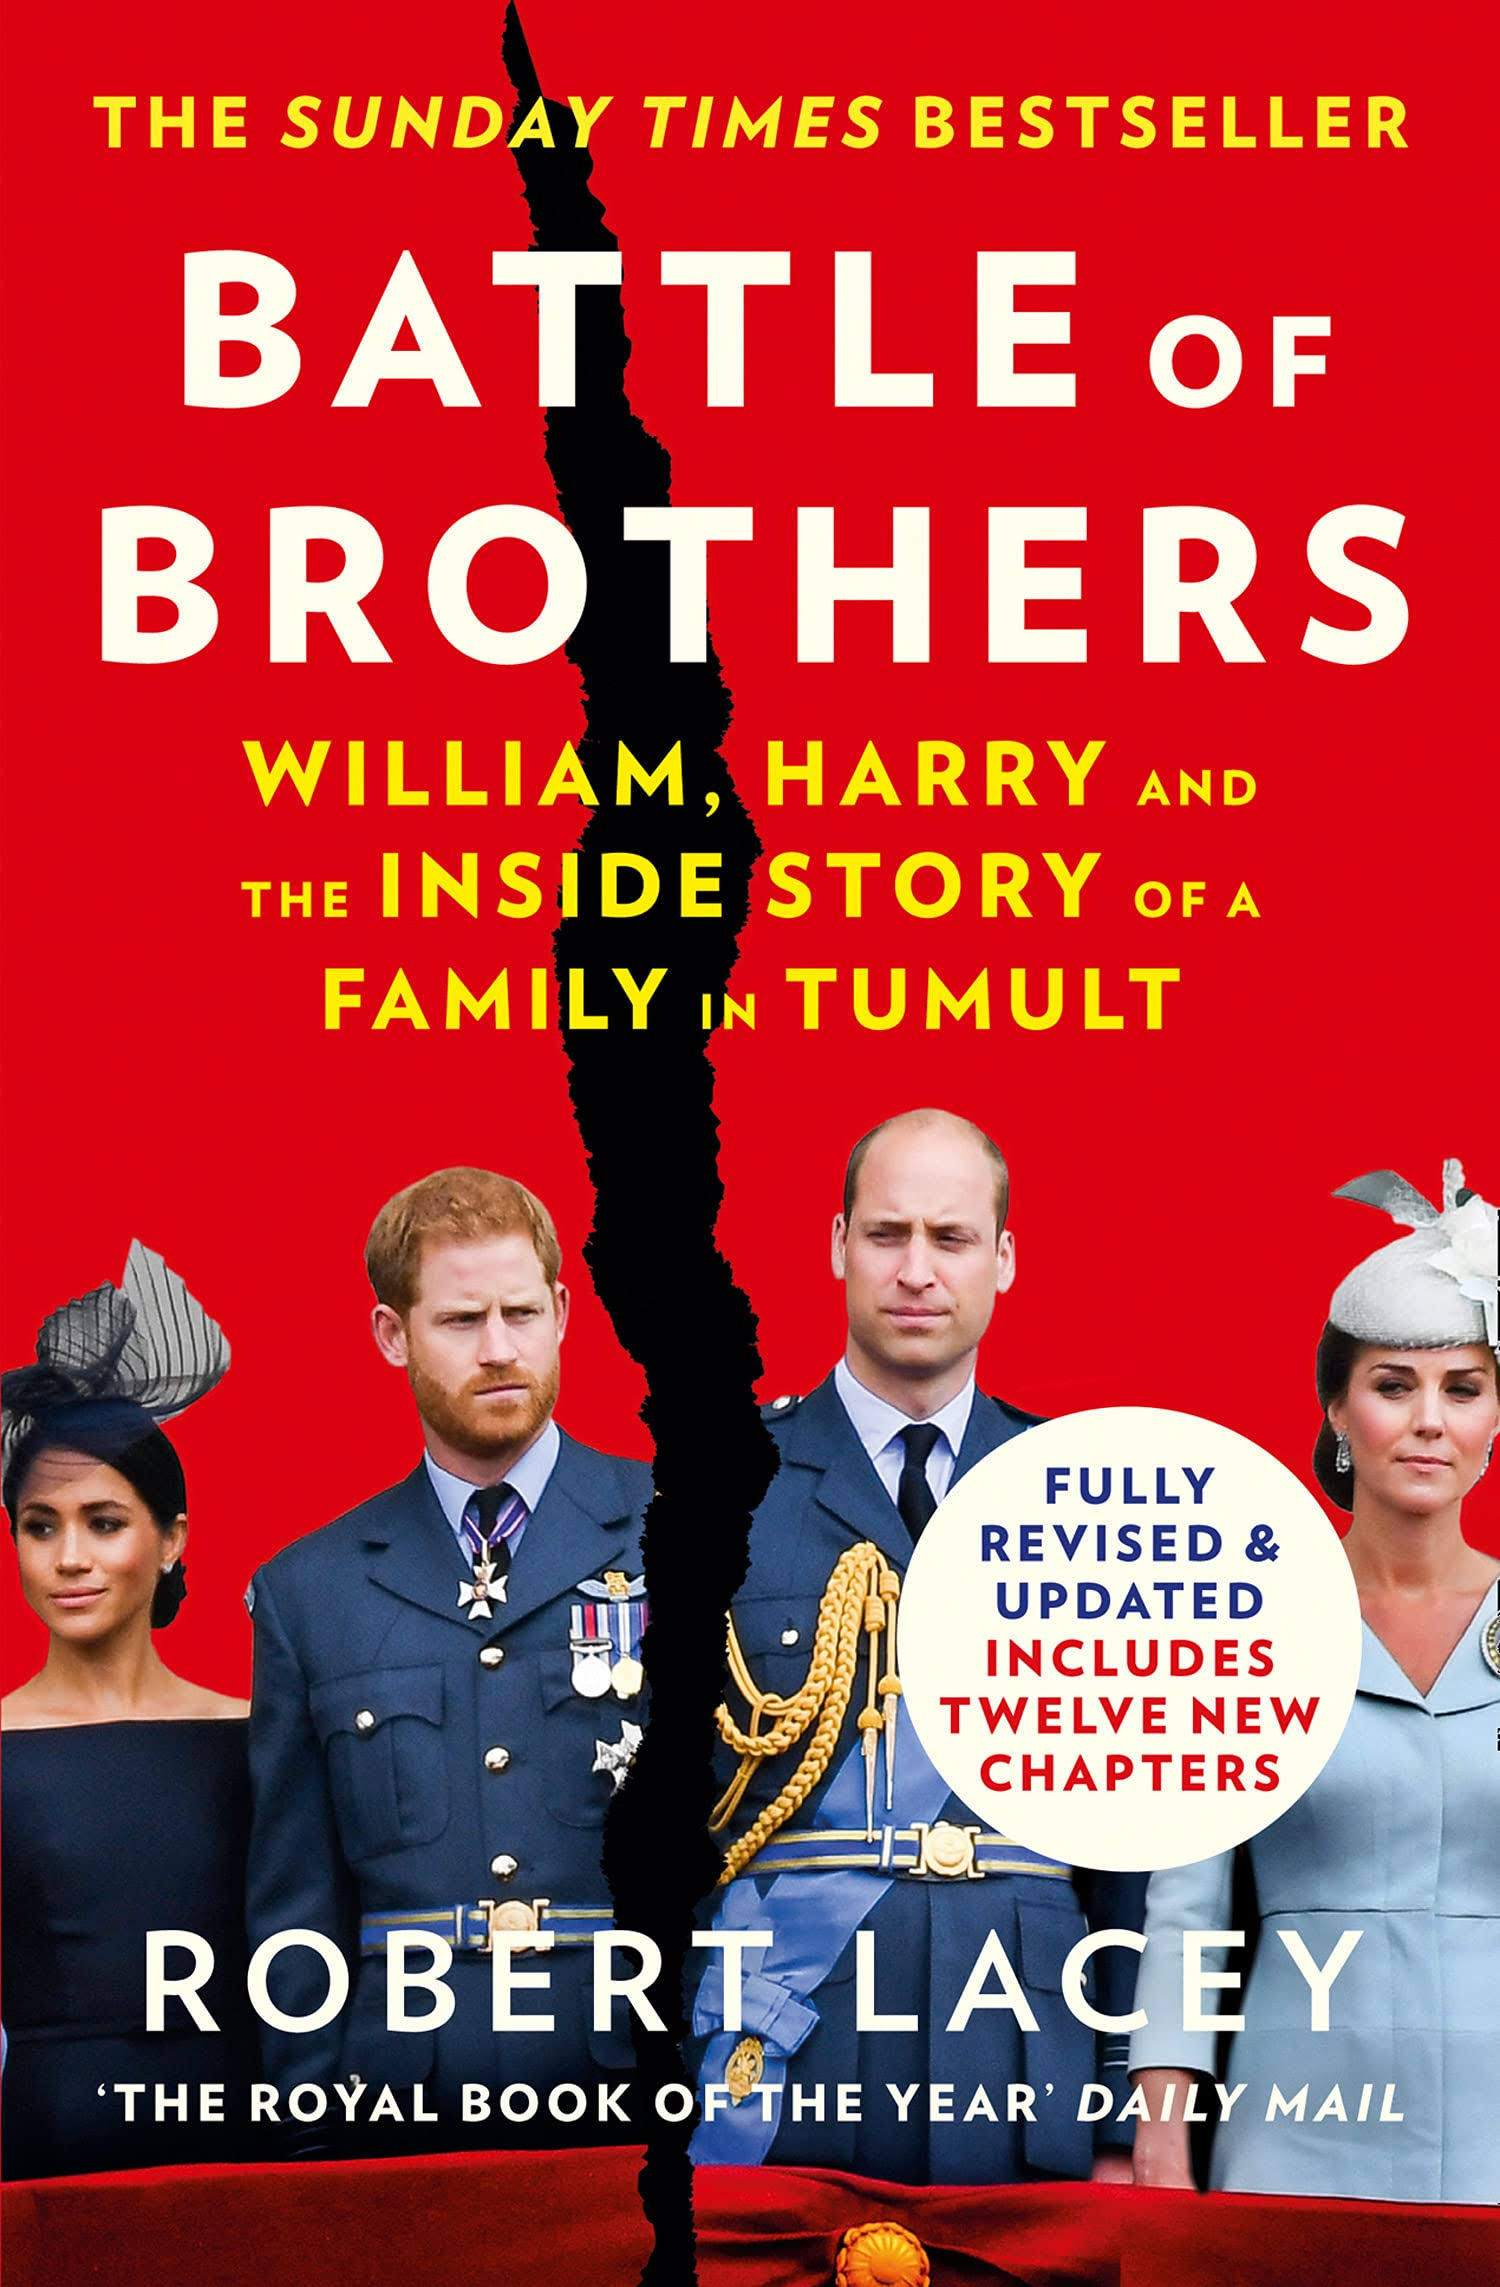 Battle of Brothers: William, Harry and the Inside Story of a Family in Tumult by Robert Lacey | Paperback / softback | 2020